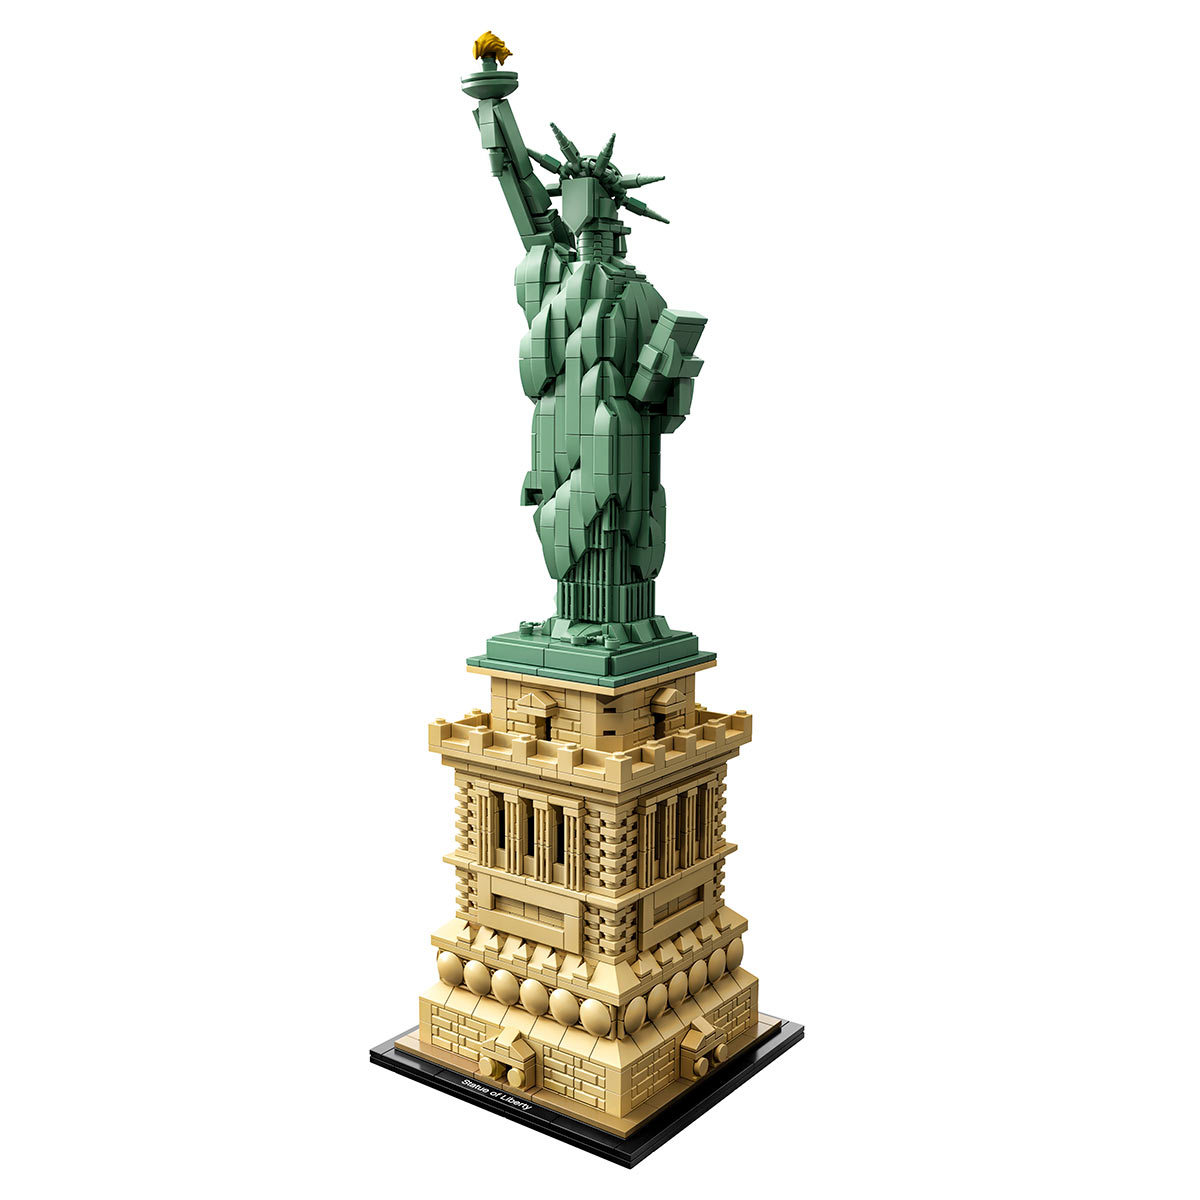 LEGO Architecture Statue of Liberty - Model 21042 (16+ Years)